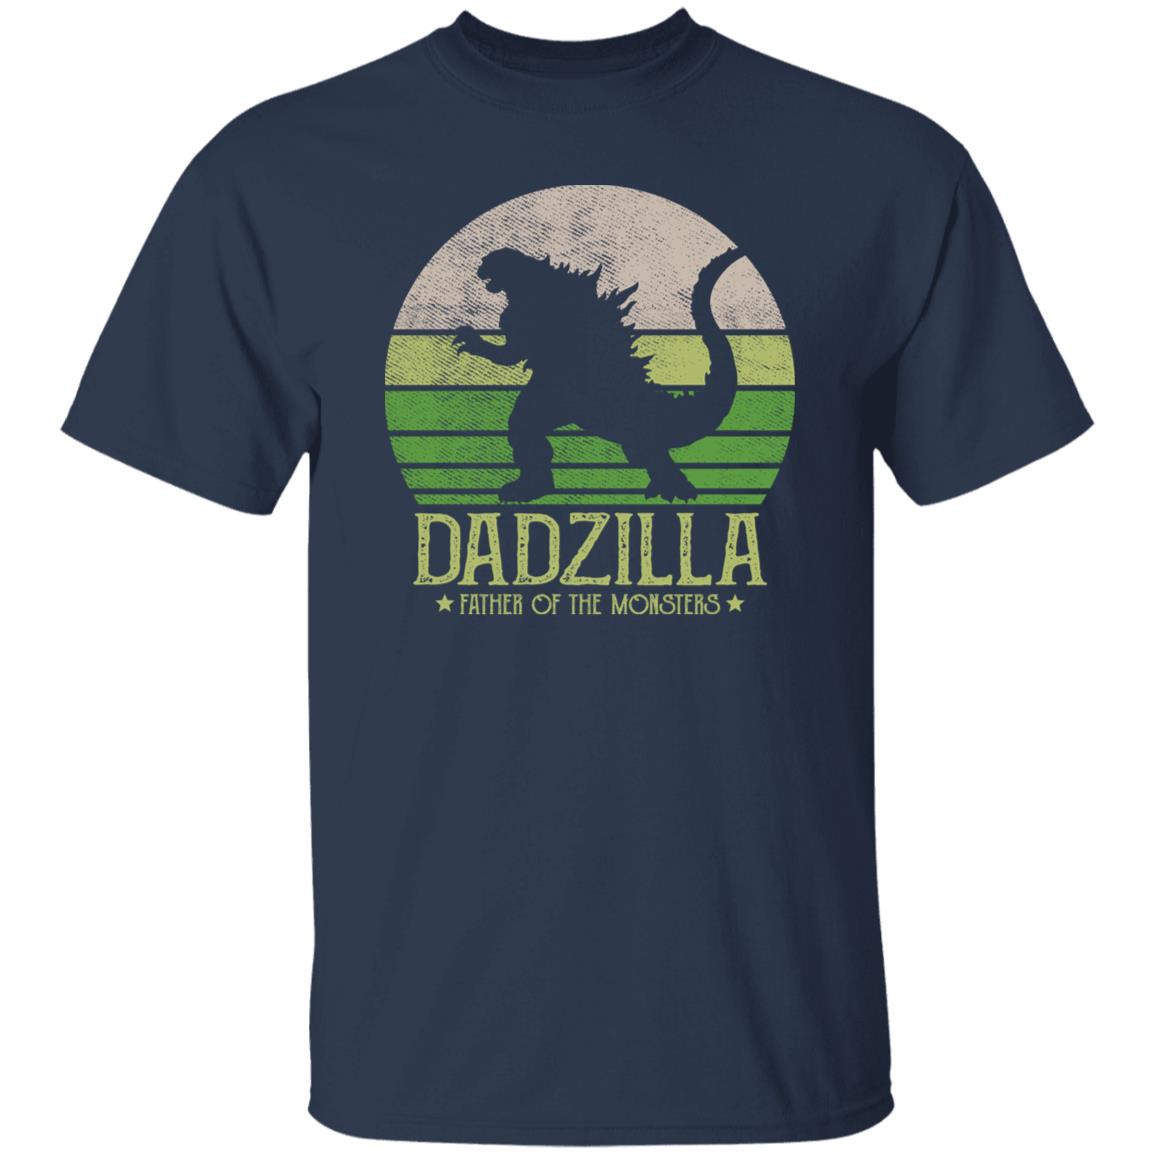 Dadzilla father of the monsters shirt funny dad tee black navy dark heather-Navy-Family-Gift-Planet